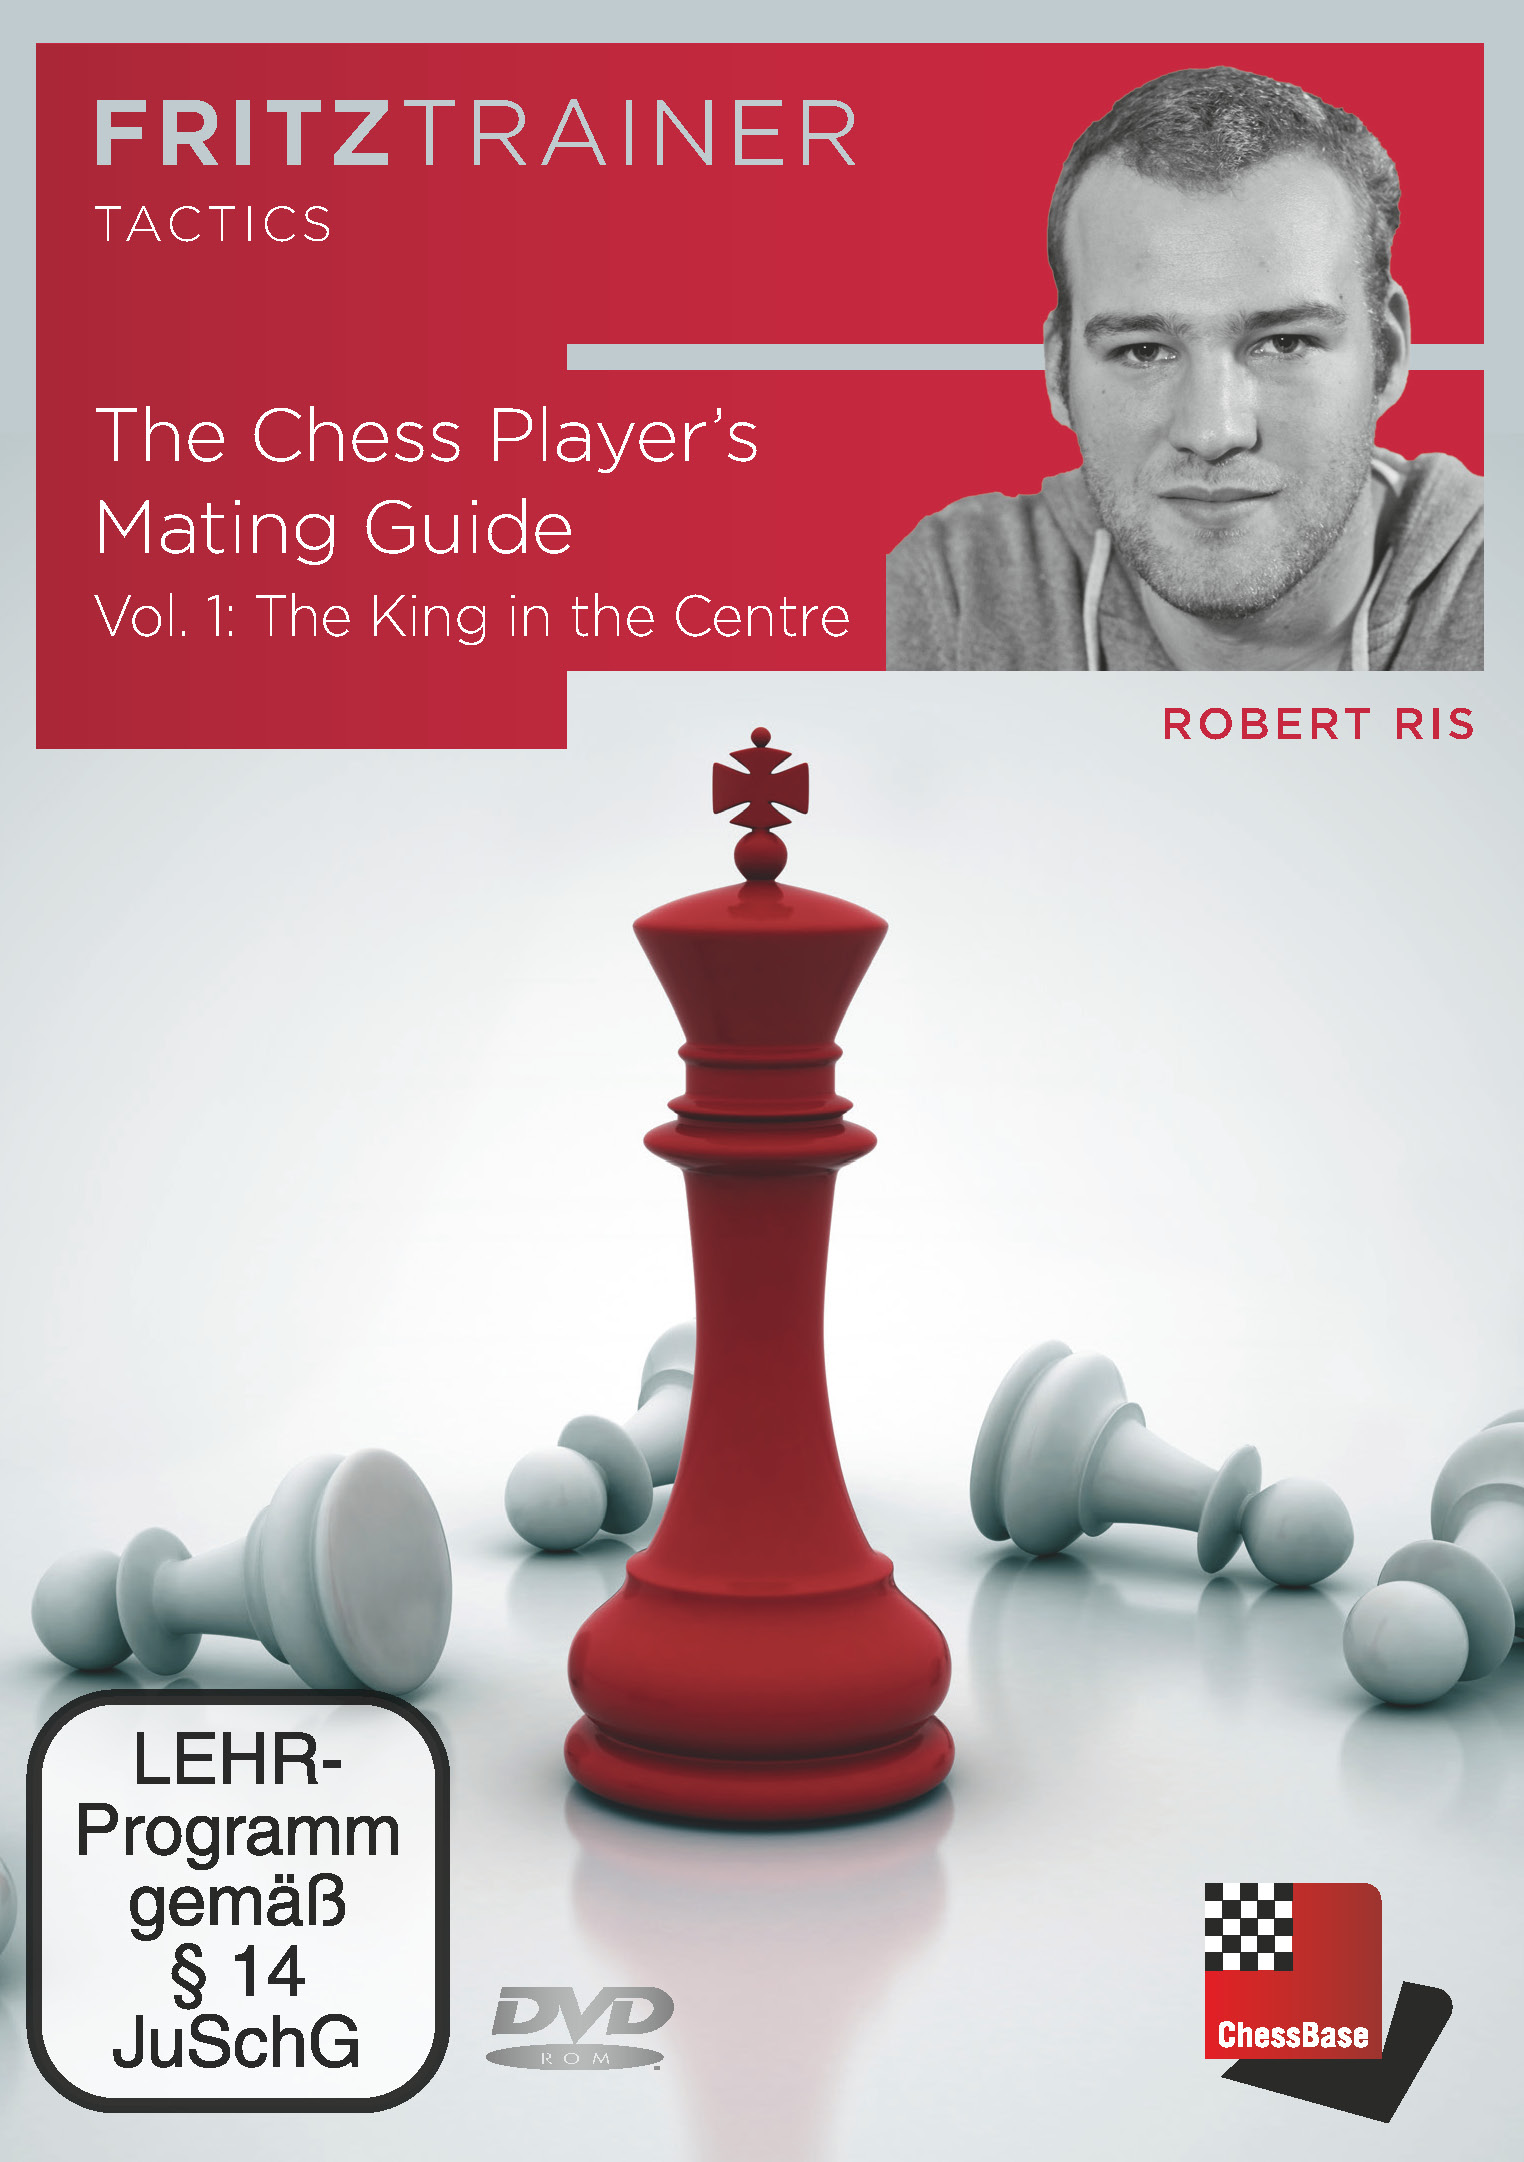 The Chess Player’s Mating Guide Vol. 1: The King in the Centre